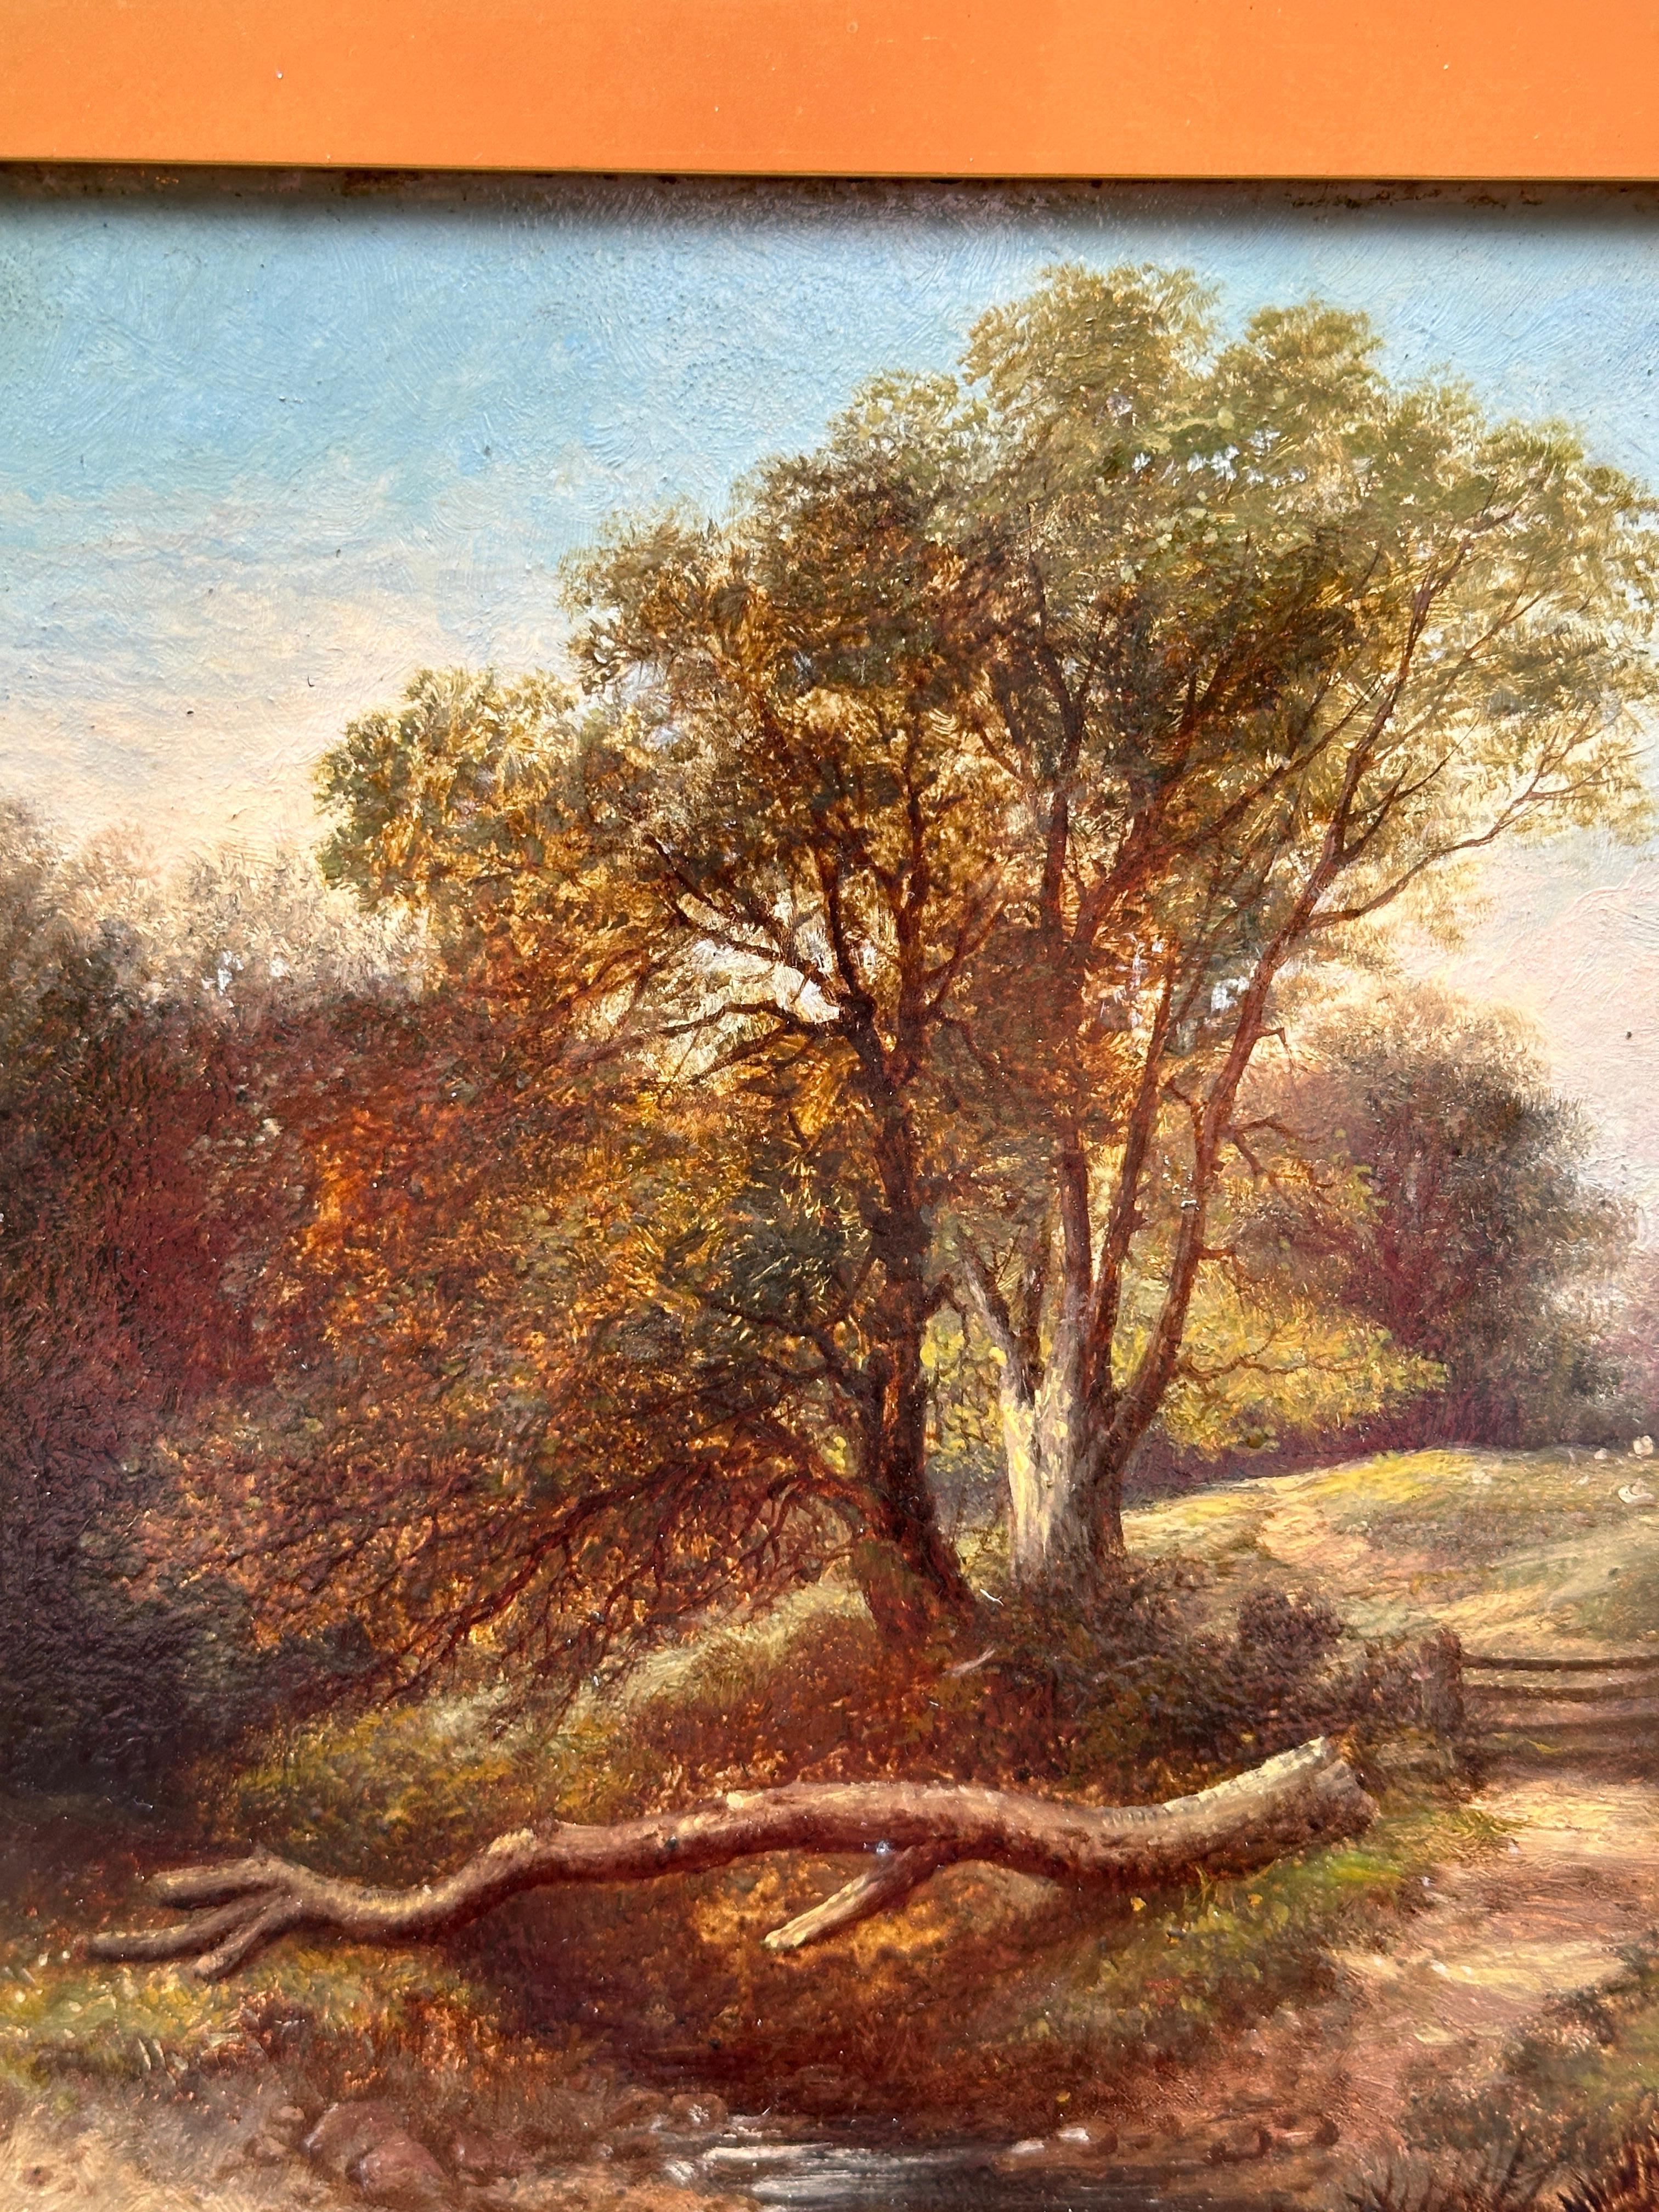 19th century English landscape with Oak trees, a stream and sheep on a pathway.

A wonderful classic English landscape dating from the middle of the 19th century. This style of painting was and still is possibly the most popular subject in English